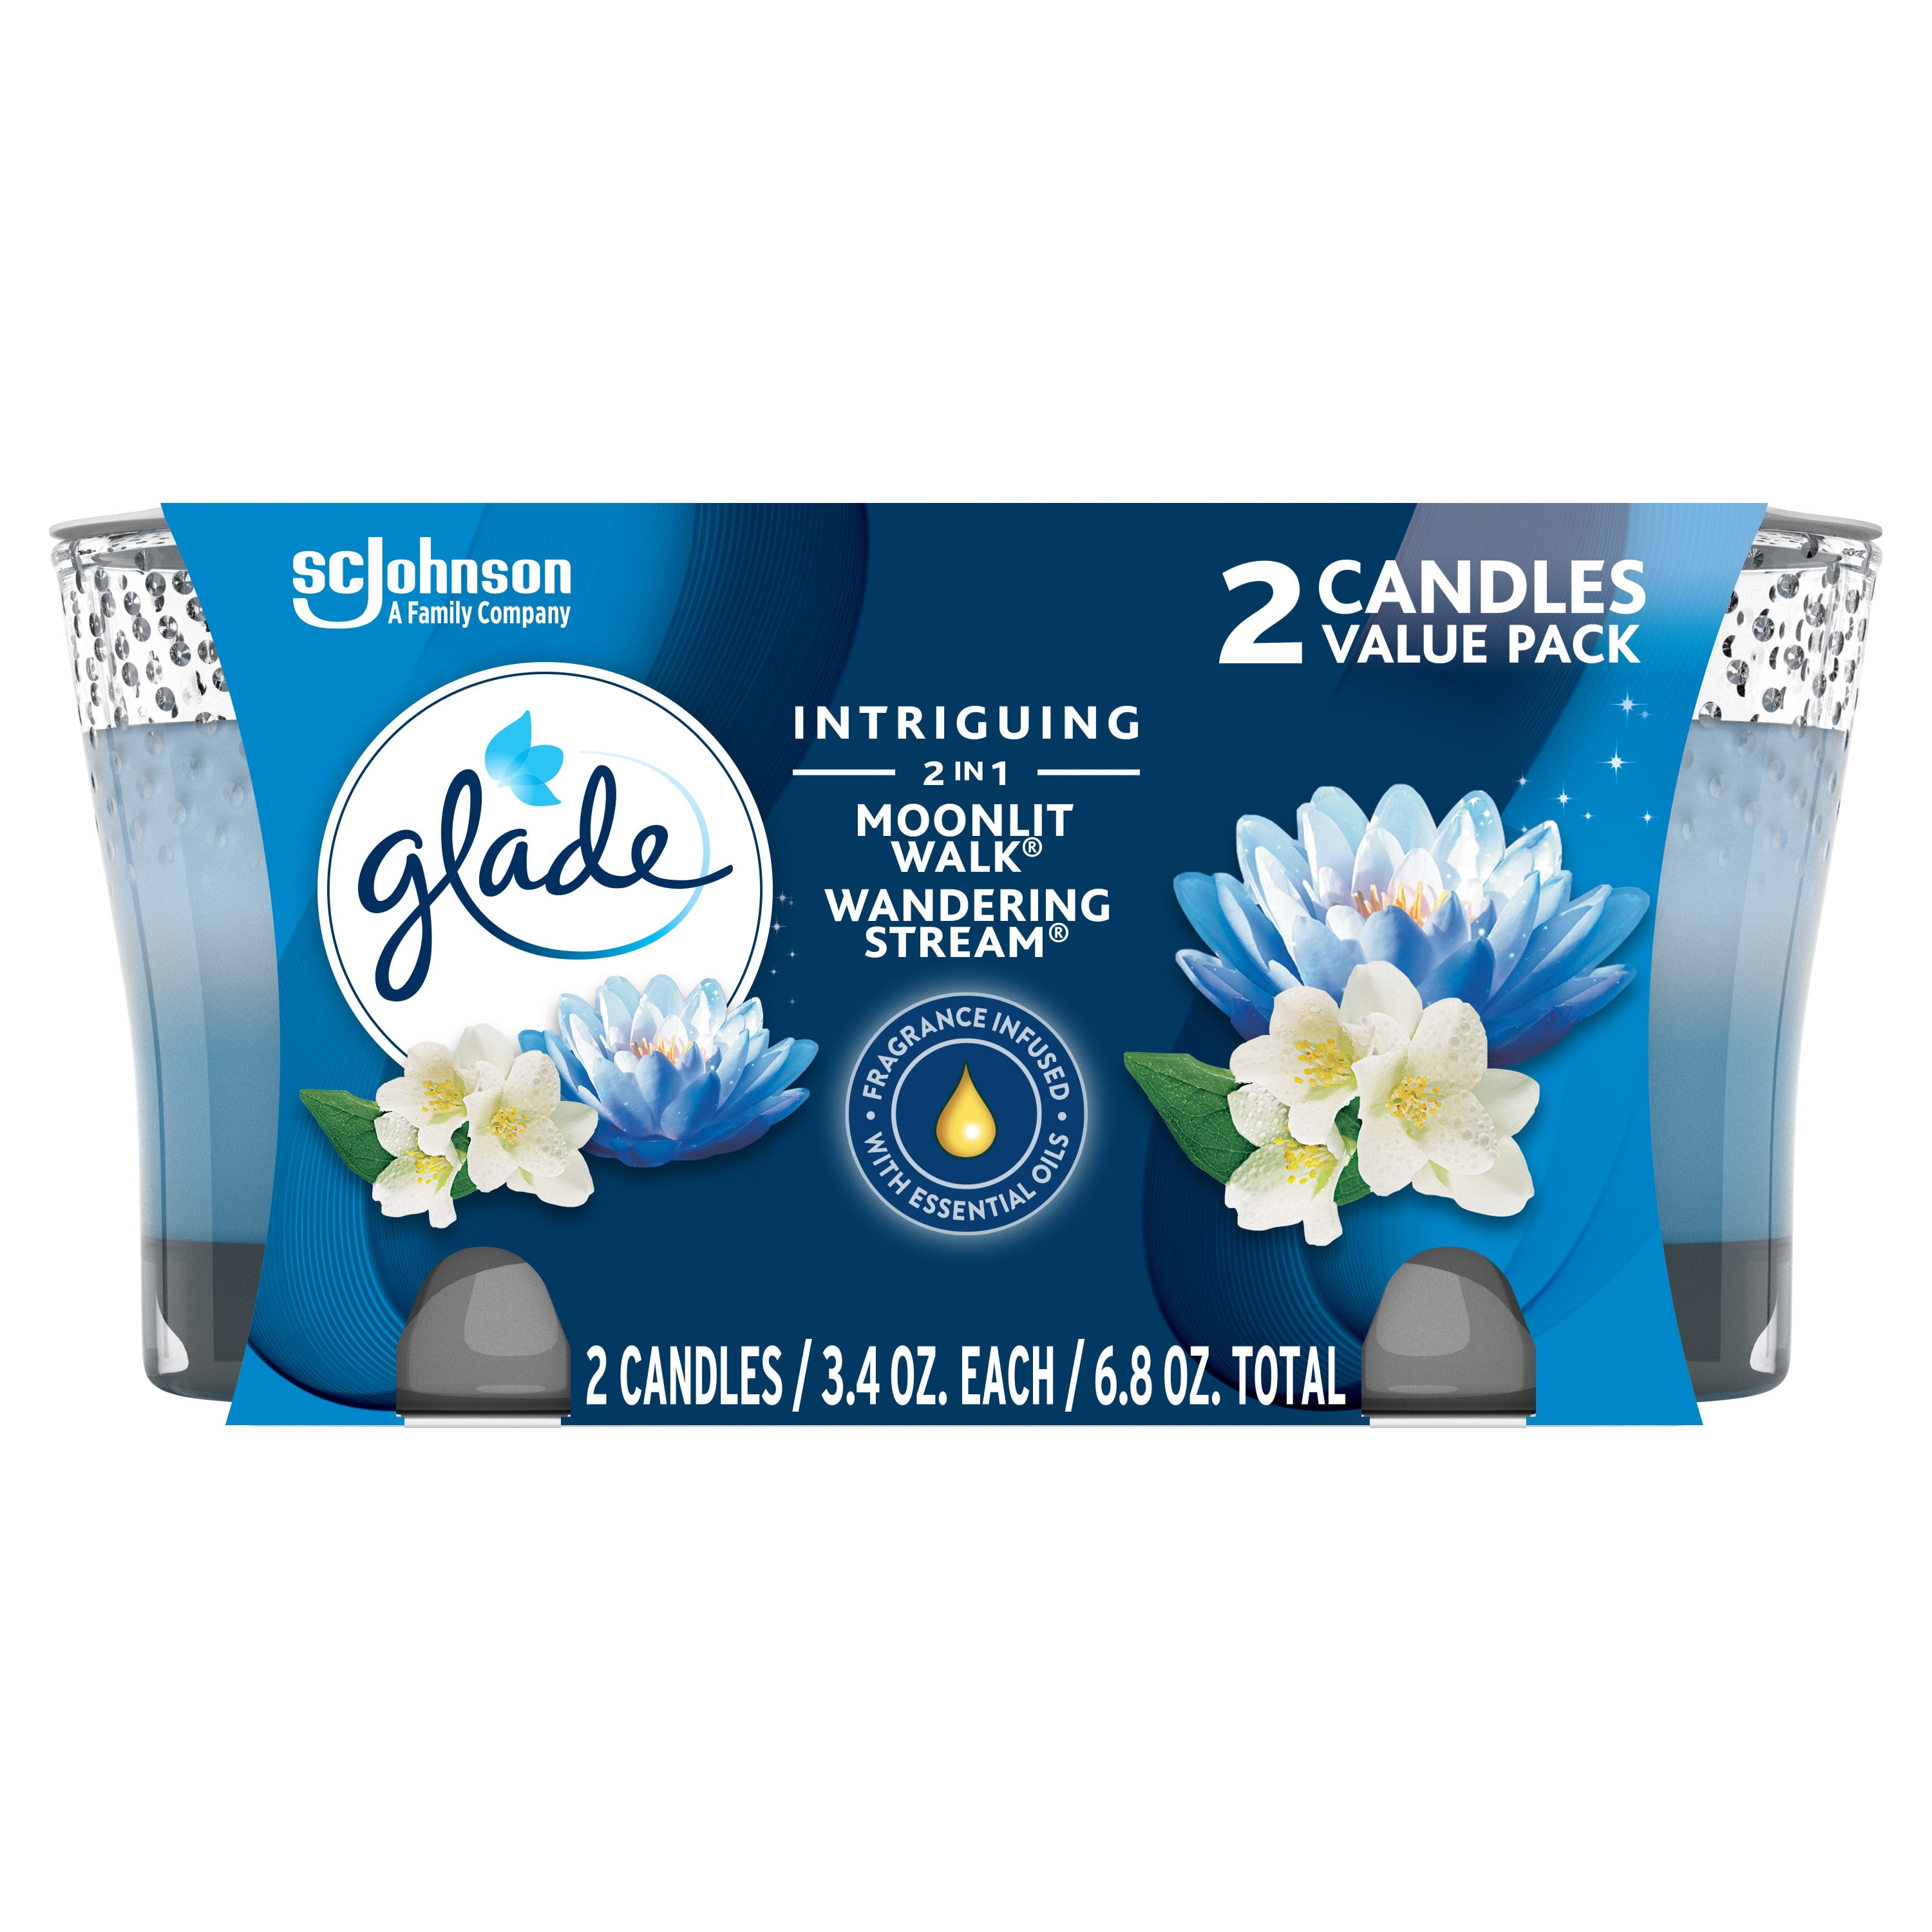 Glade Candle, Clean Linen, 3.4 oz, (Pack of 2)